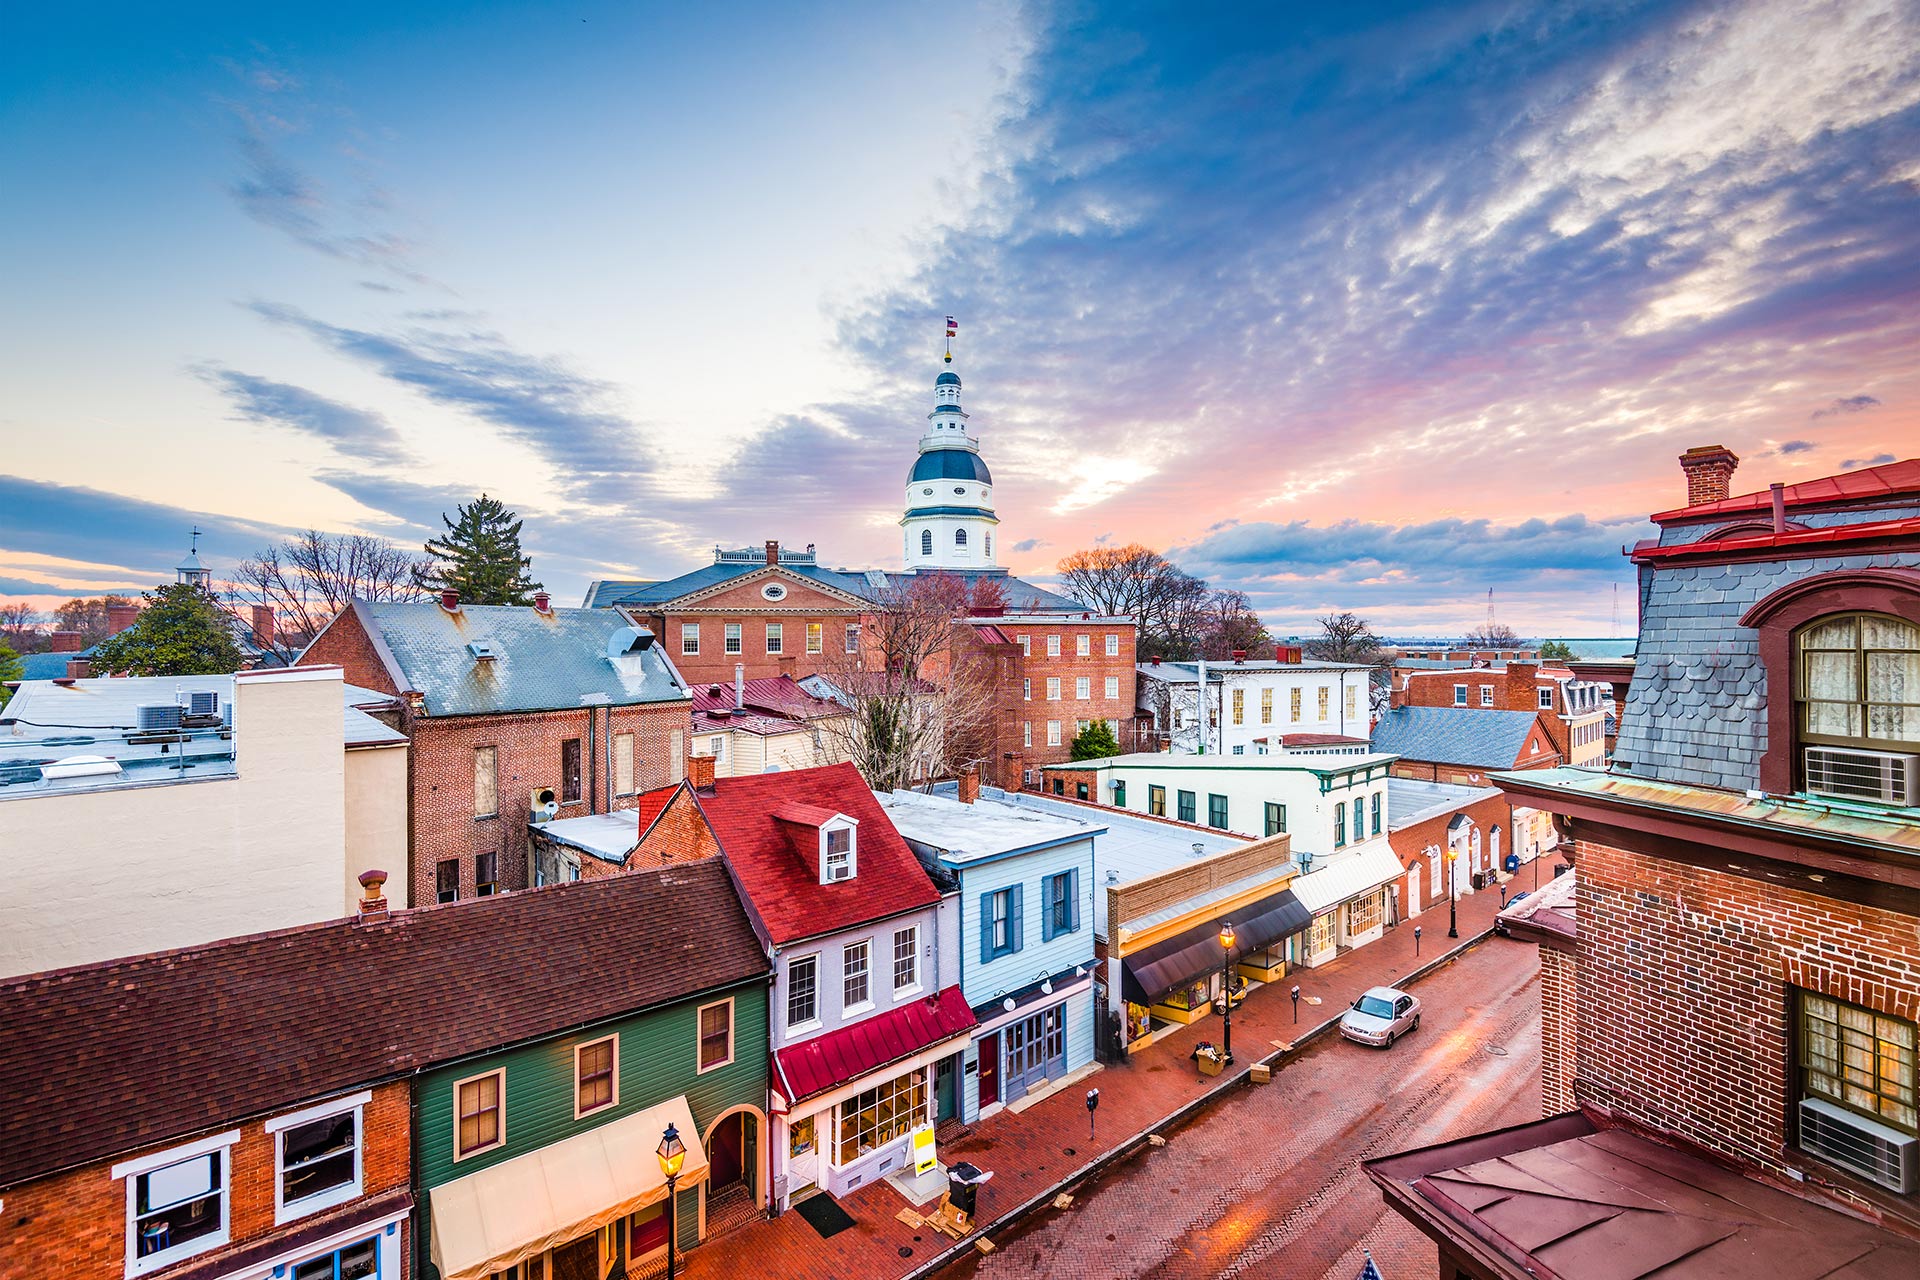 Annapolis, Maryland; Photo Courtesy of Sean Pavone/Shutterstock.com